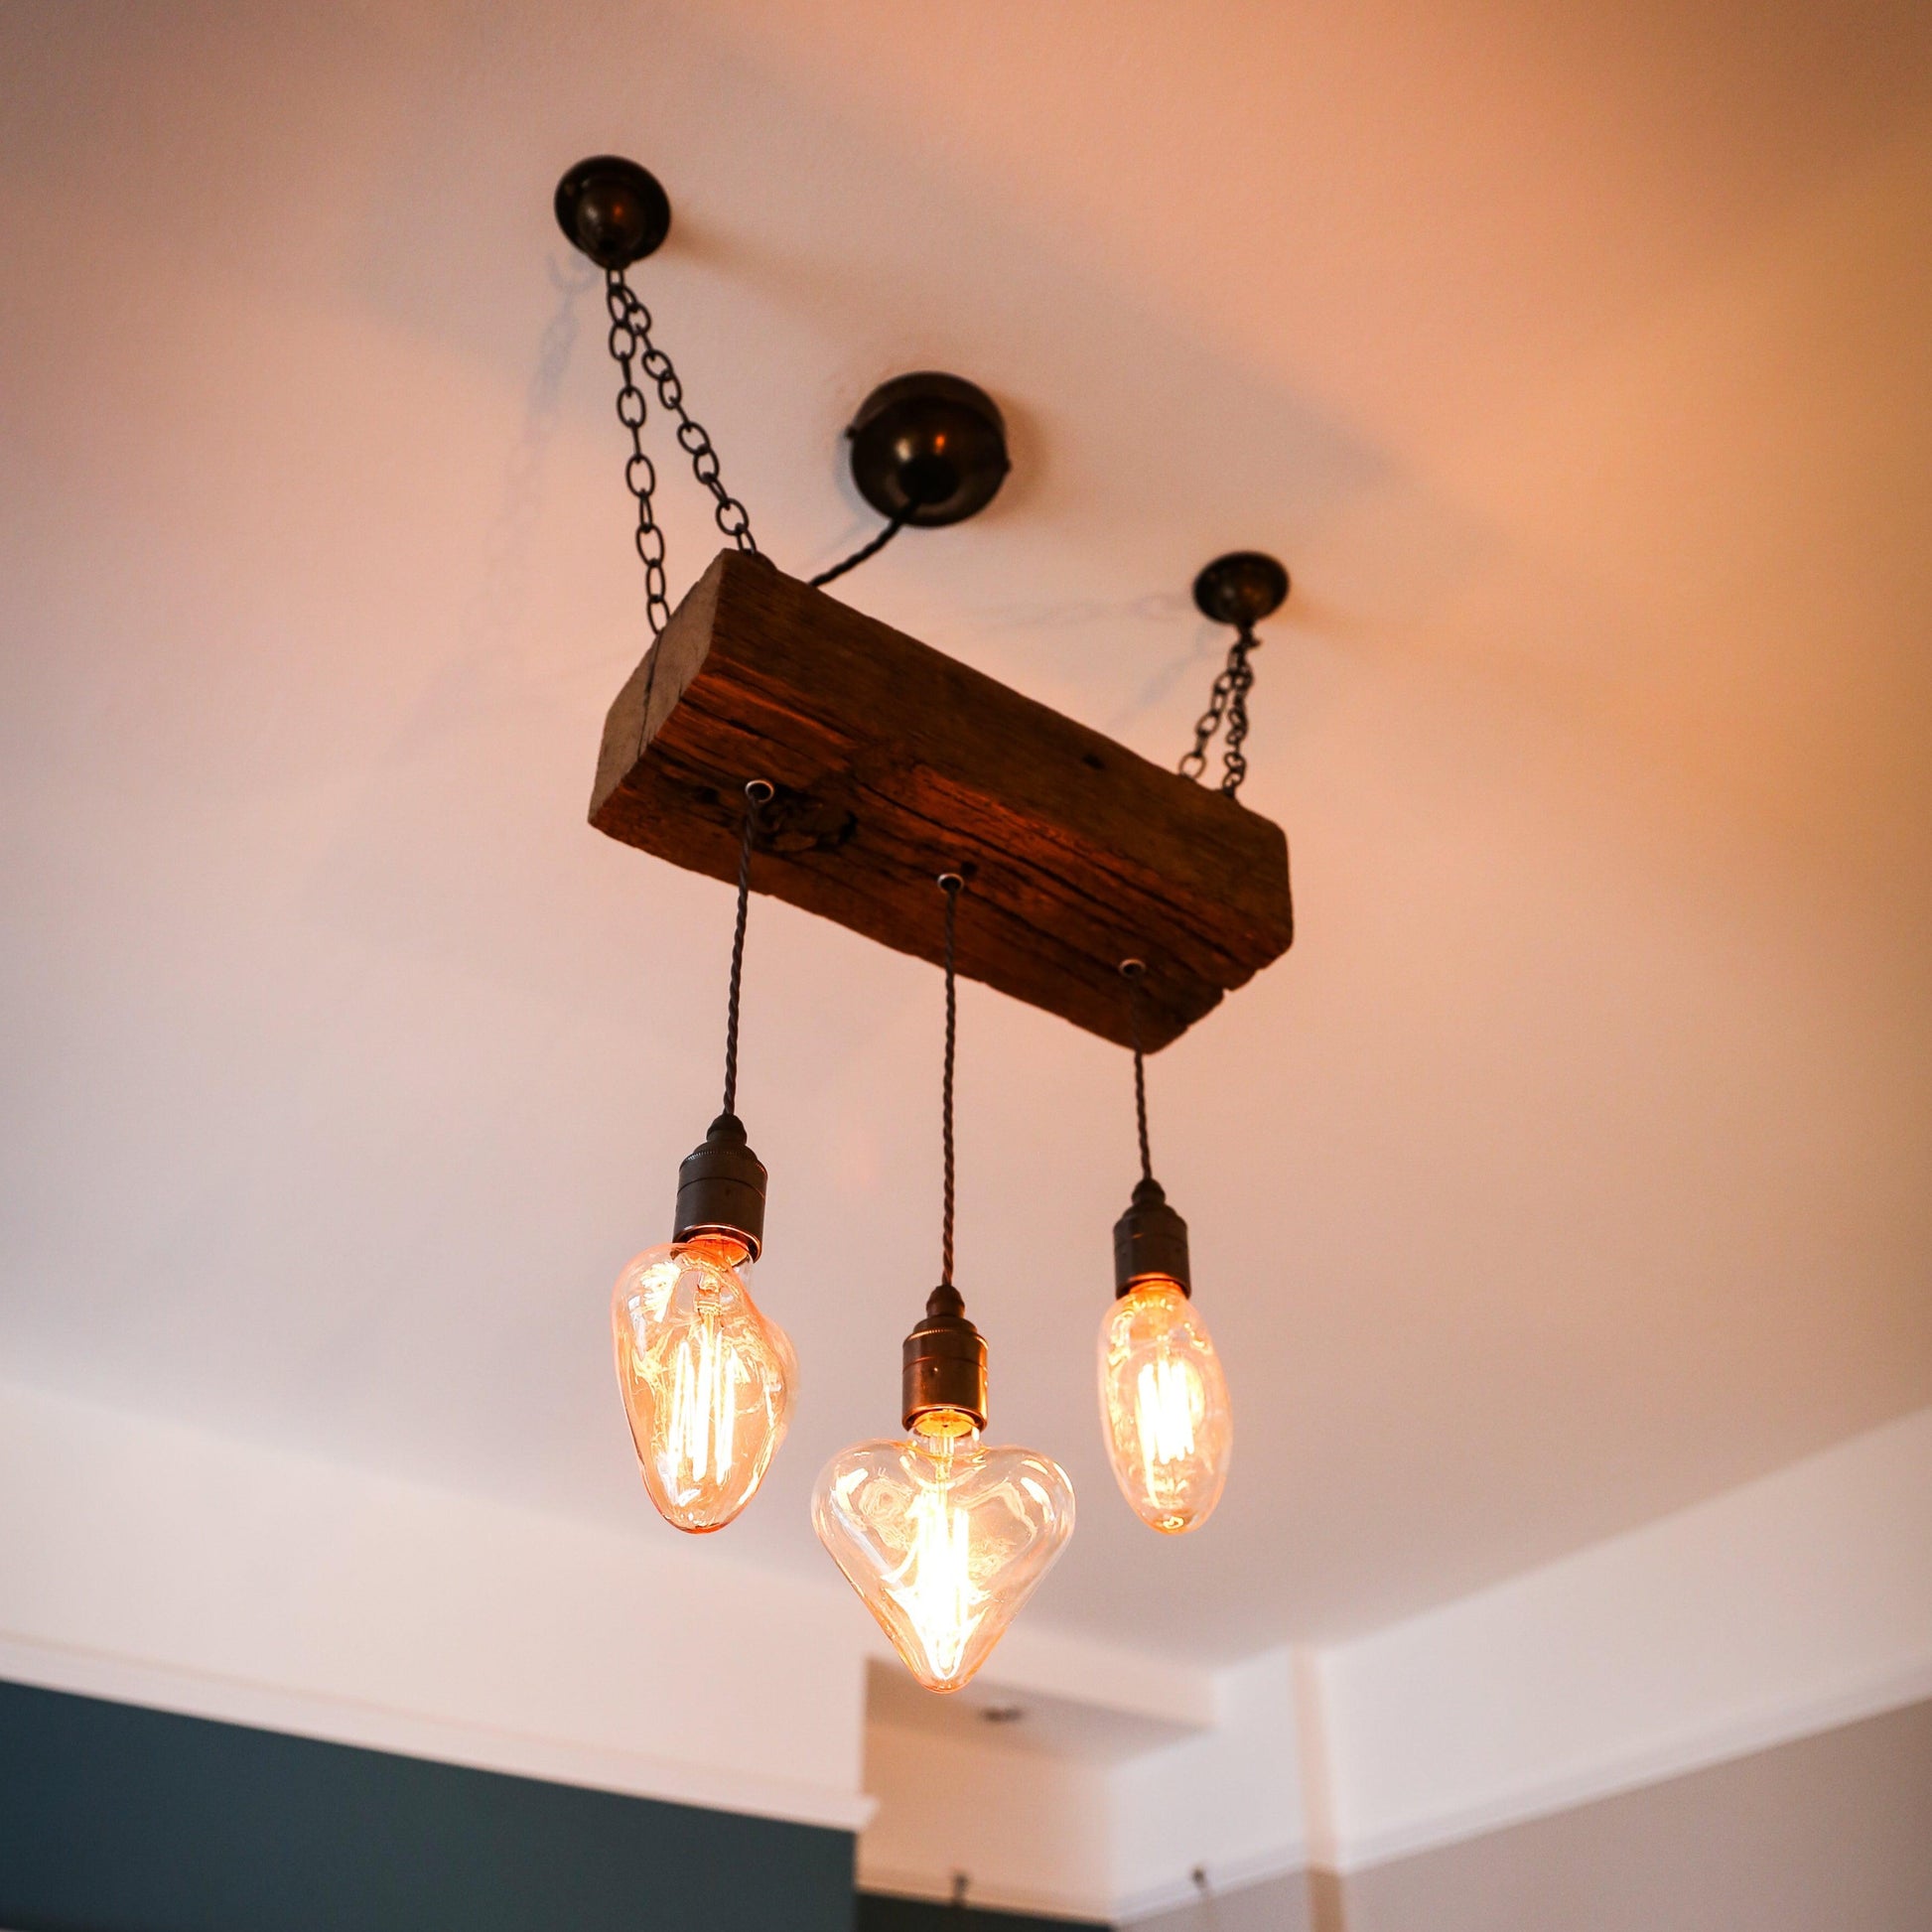 Triple Heartwood Elegance: Wooden Chandelier with Three-Bulb Ceiling Cluster Pendant Light - MooBoo Home